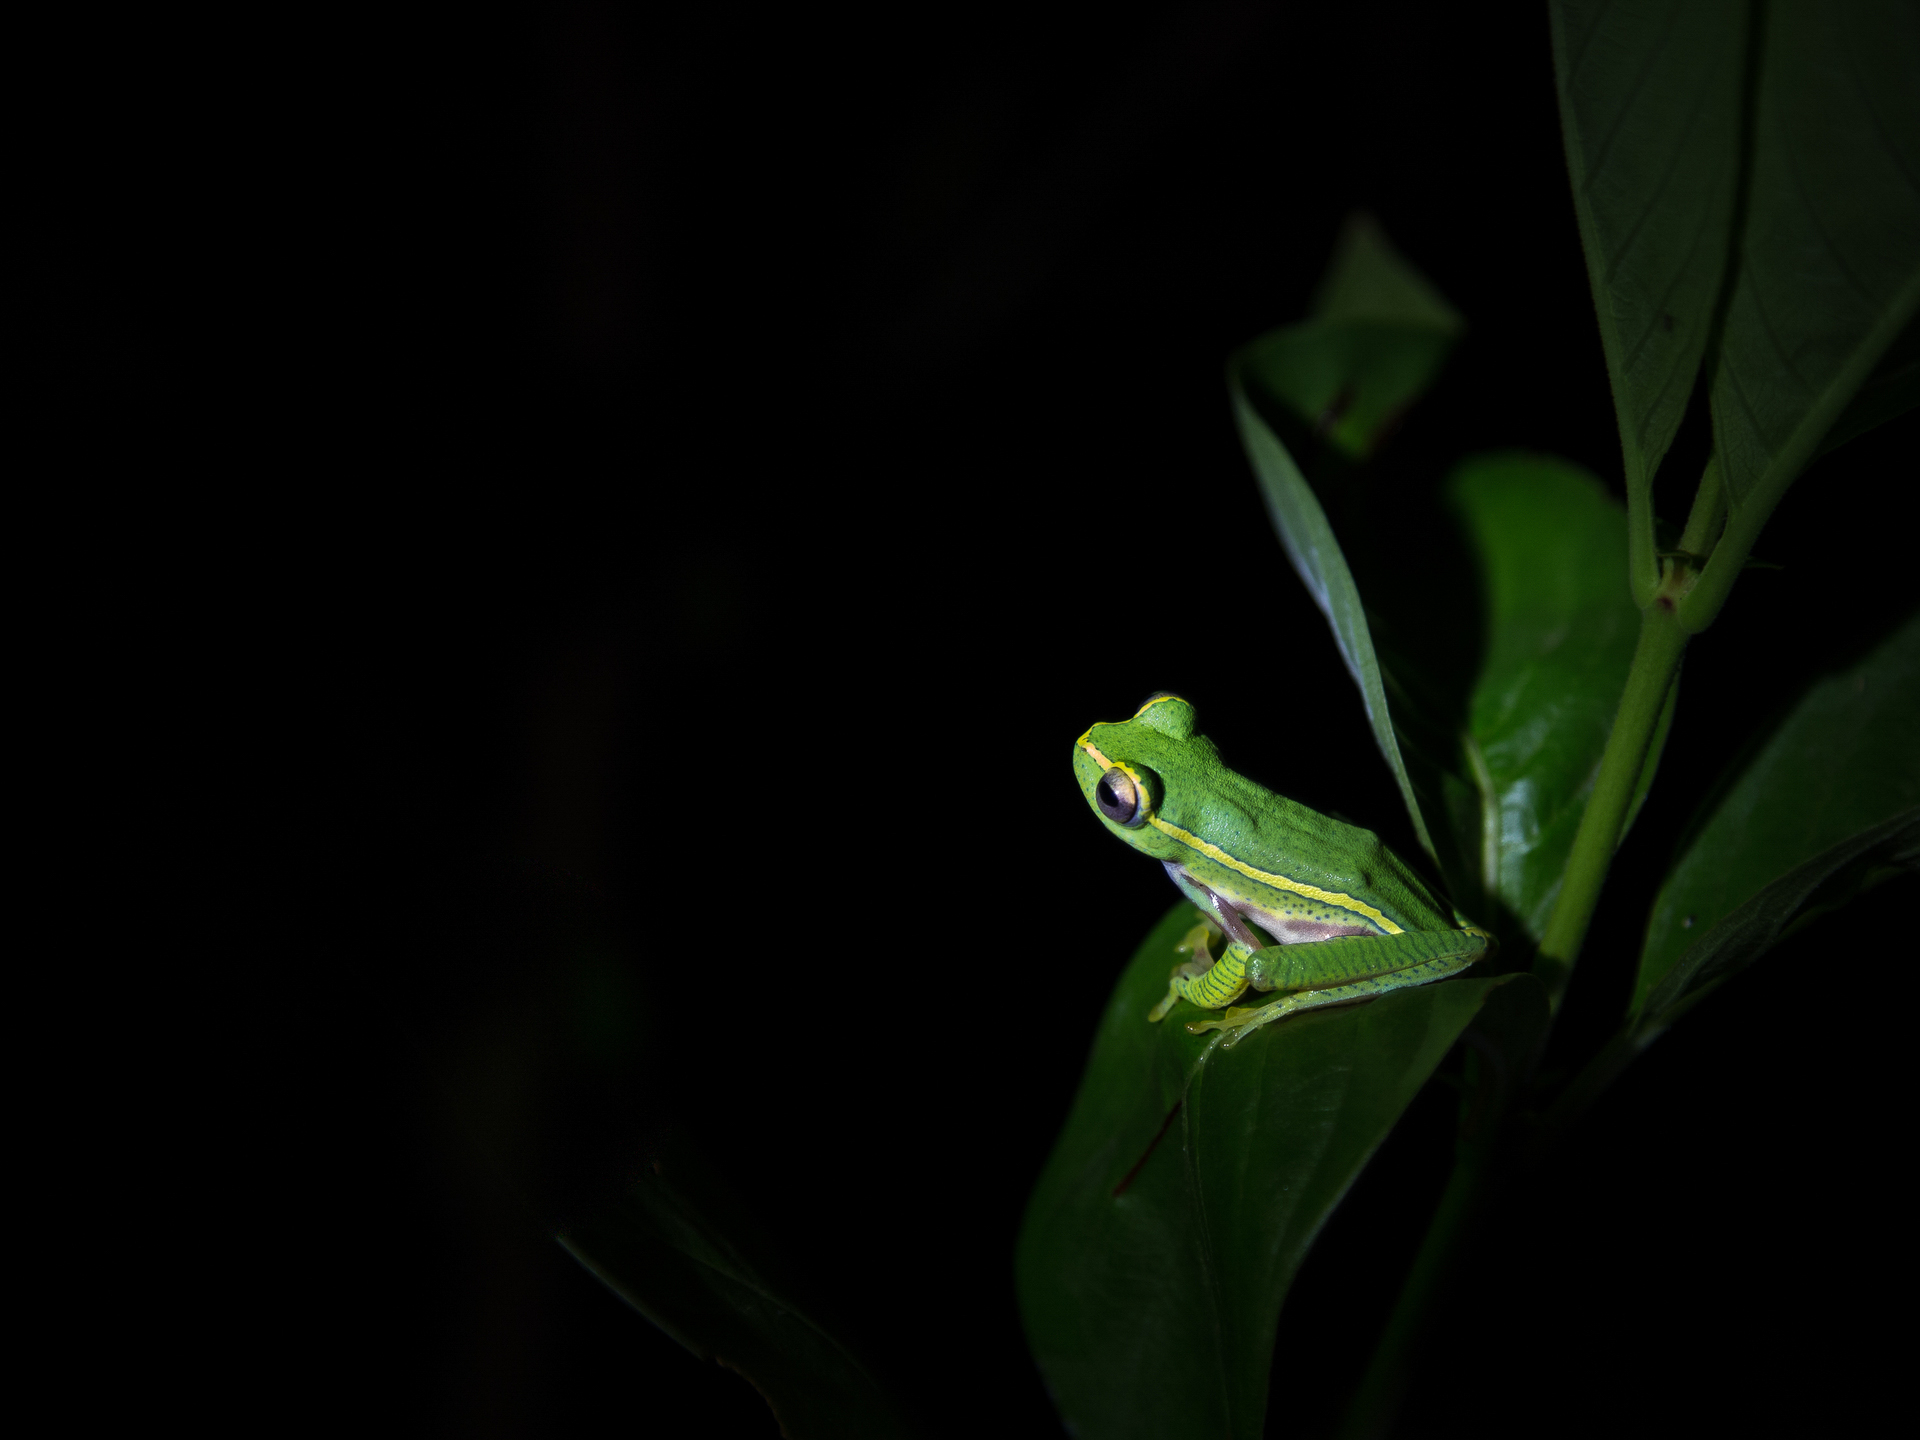 This Yellow-striped tree frog